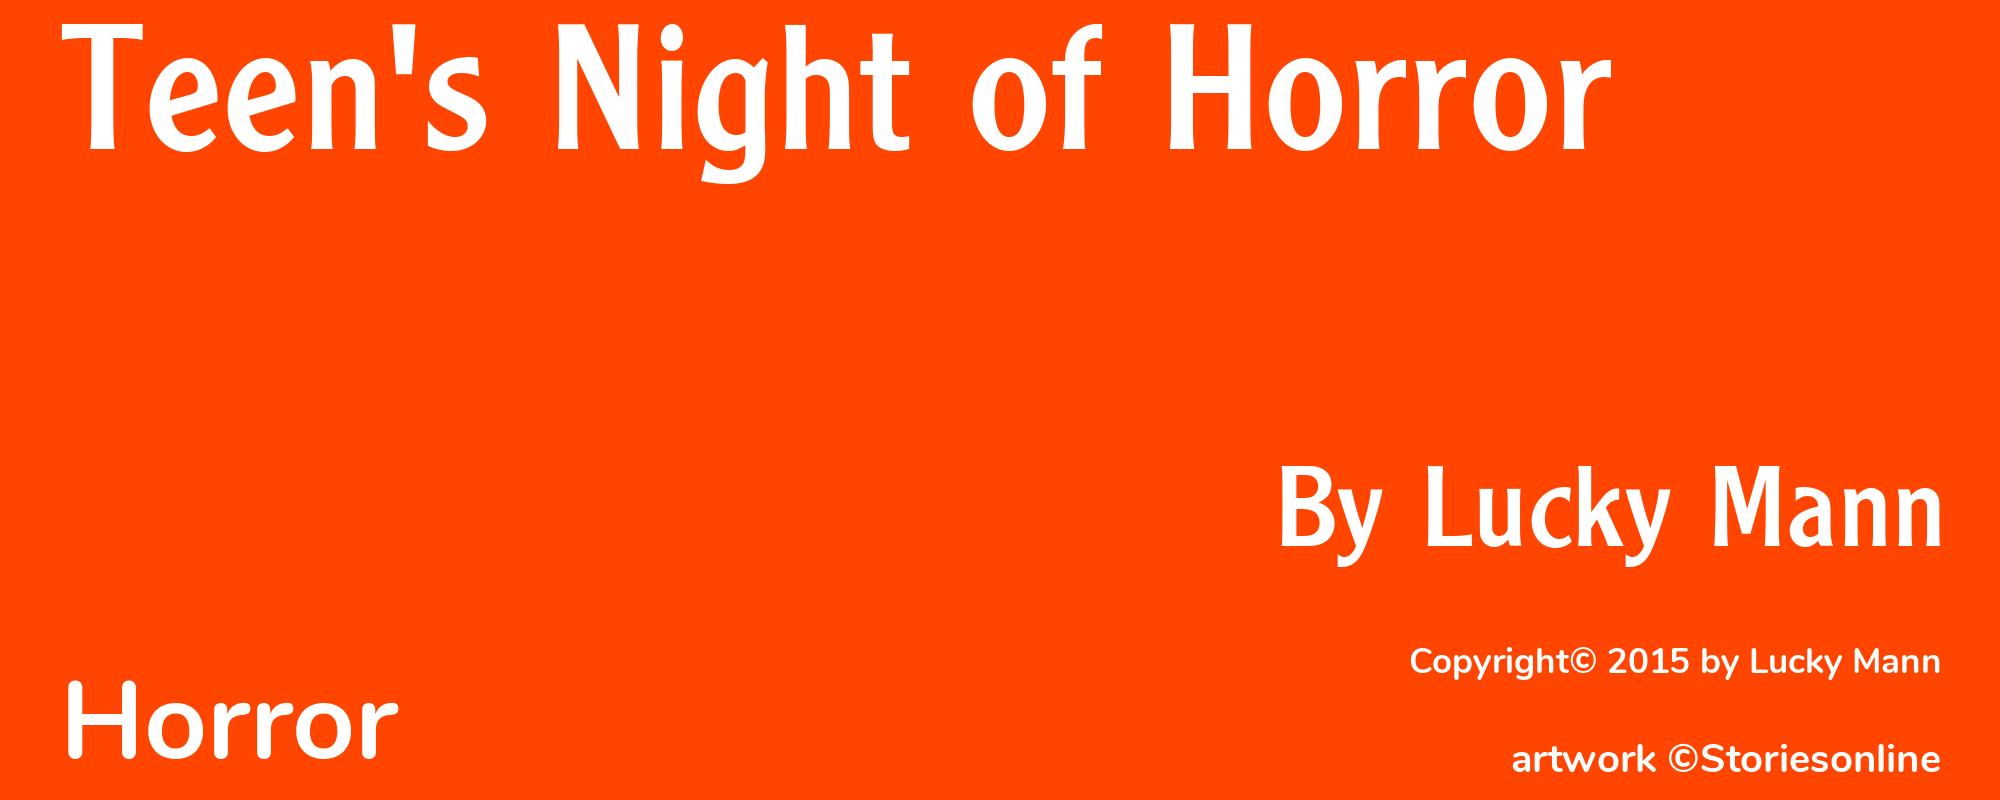 Teen's Night of Horror - Cover